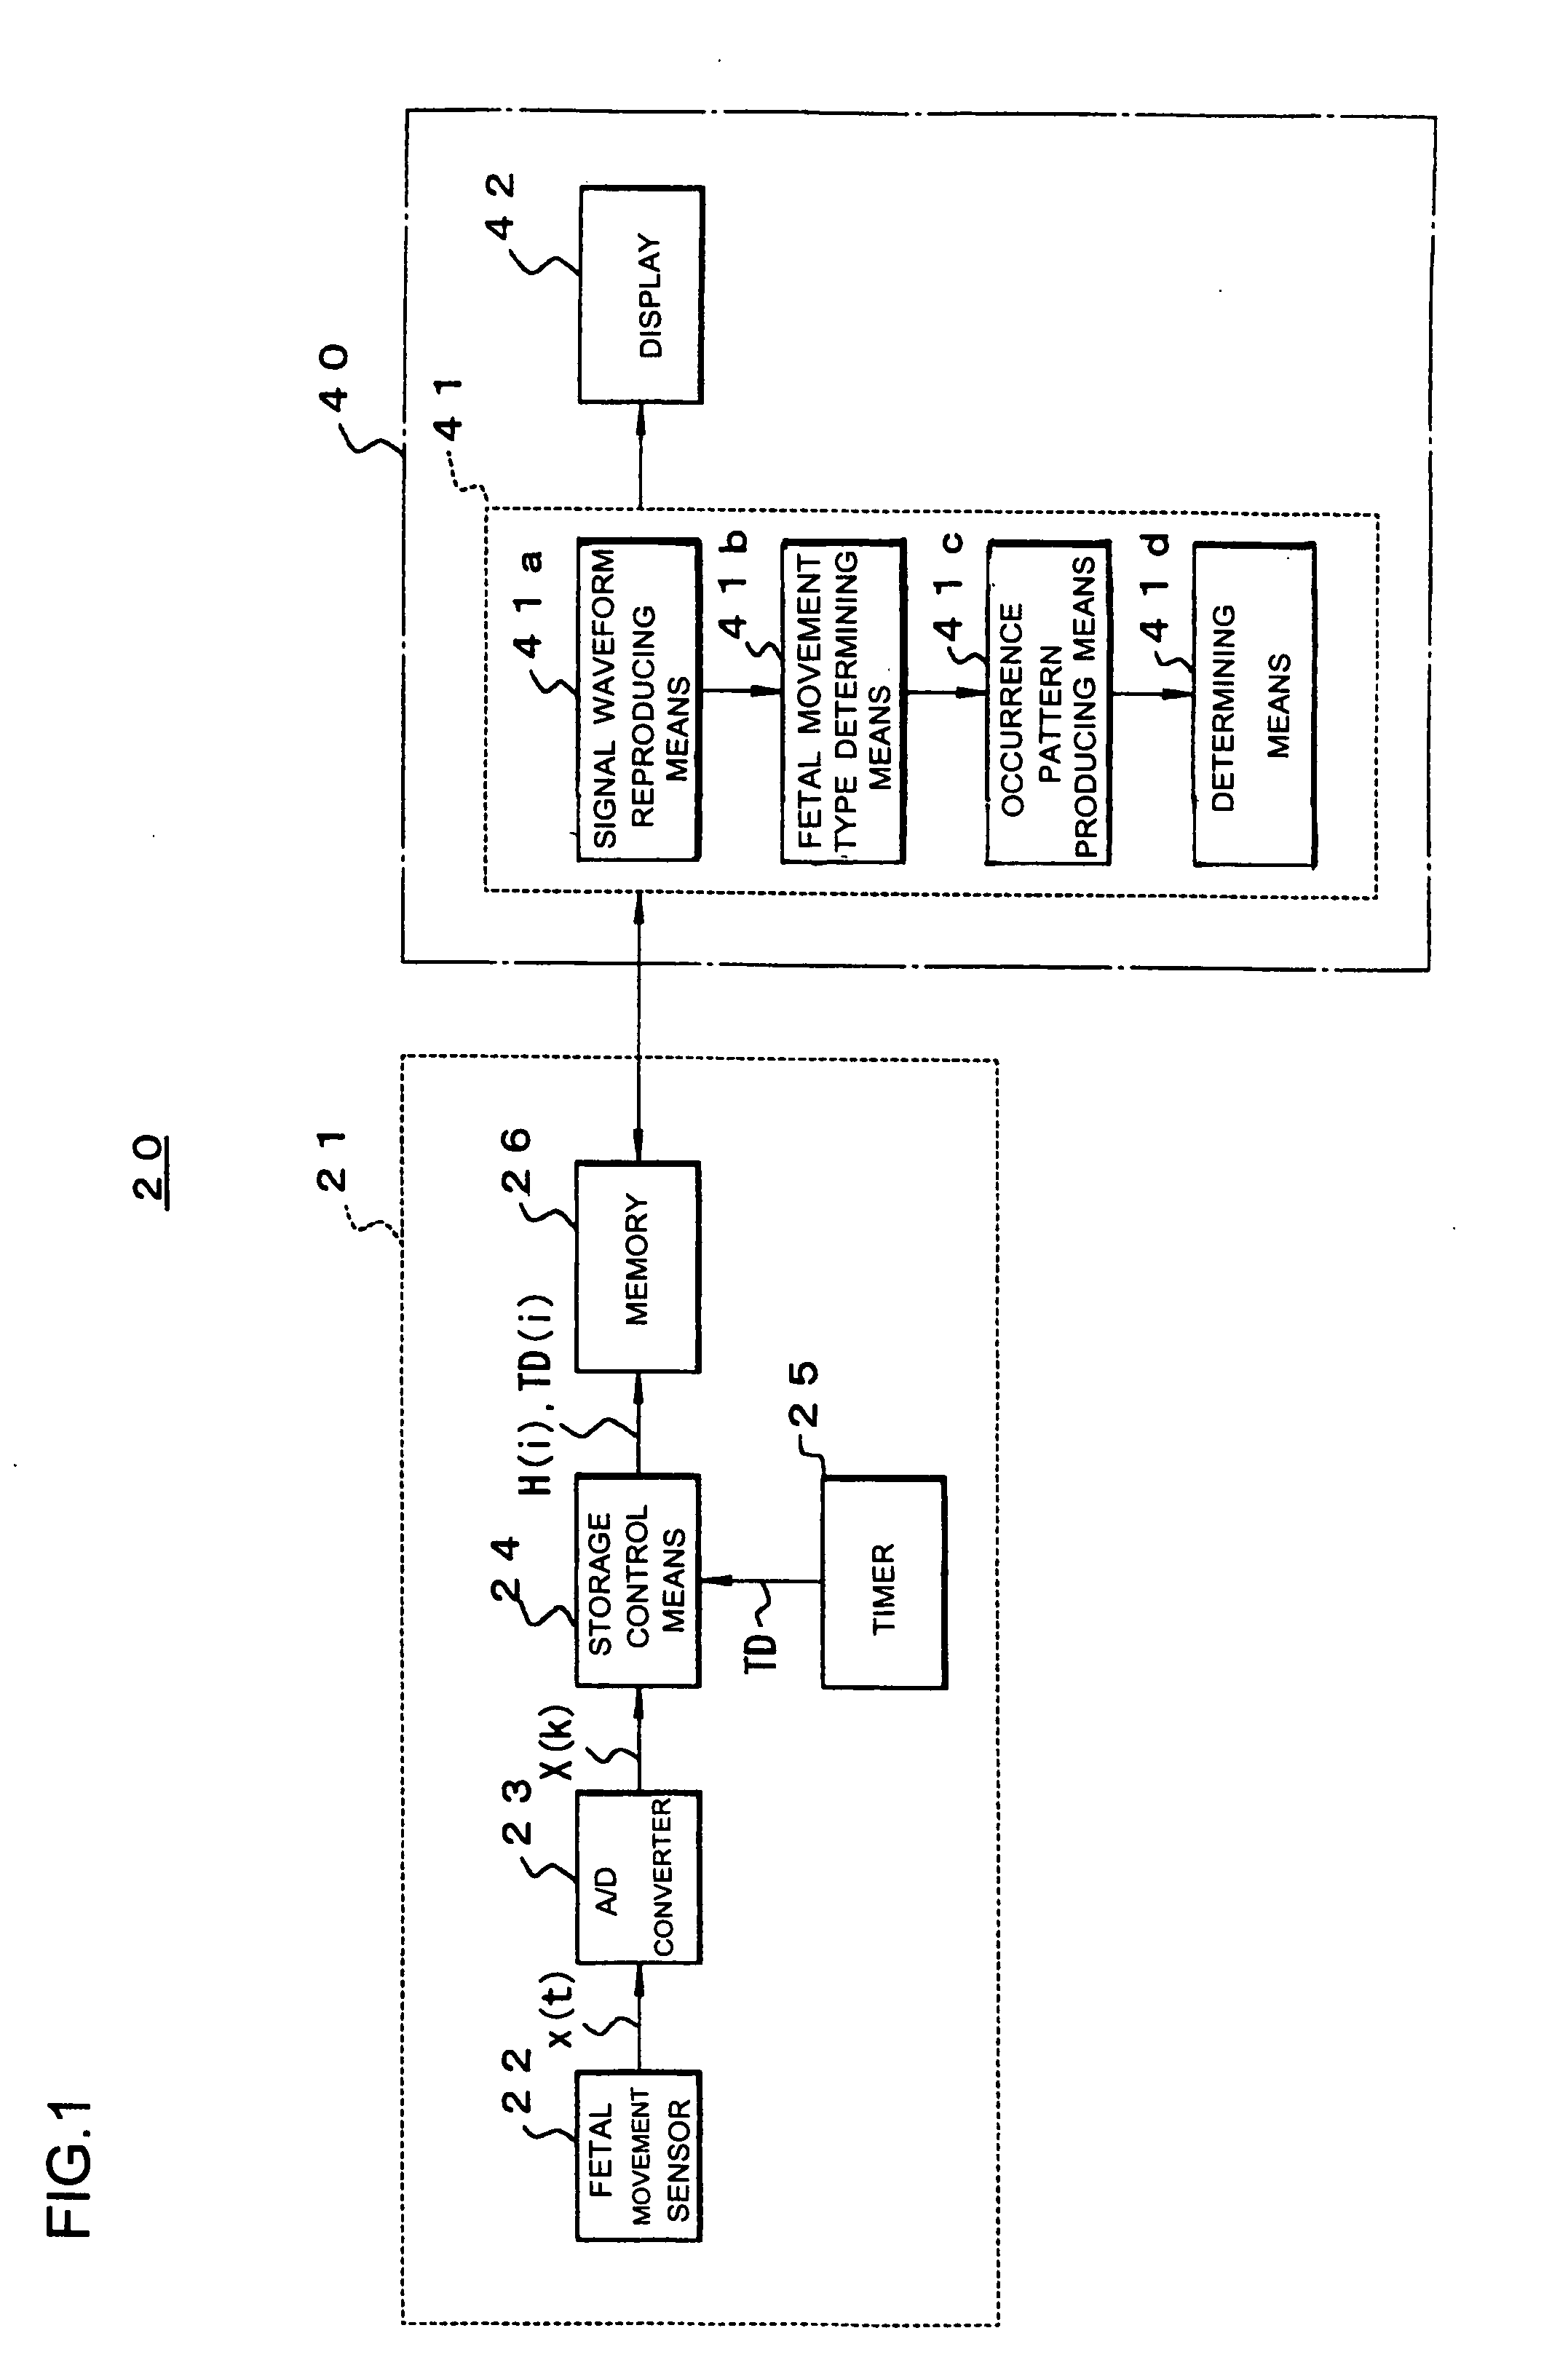 Fetal Movement Monitoring System and Fetal Movement Information Collecting Device